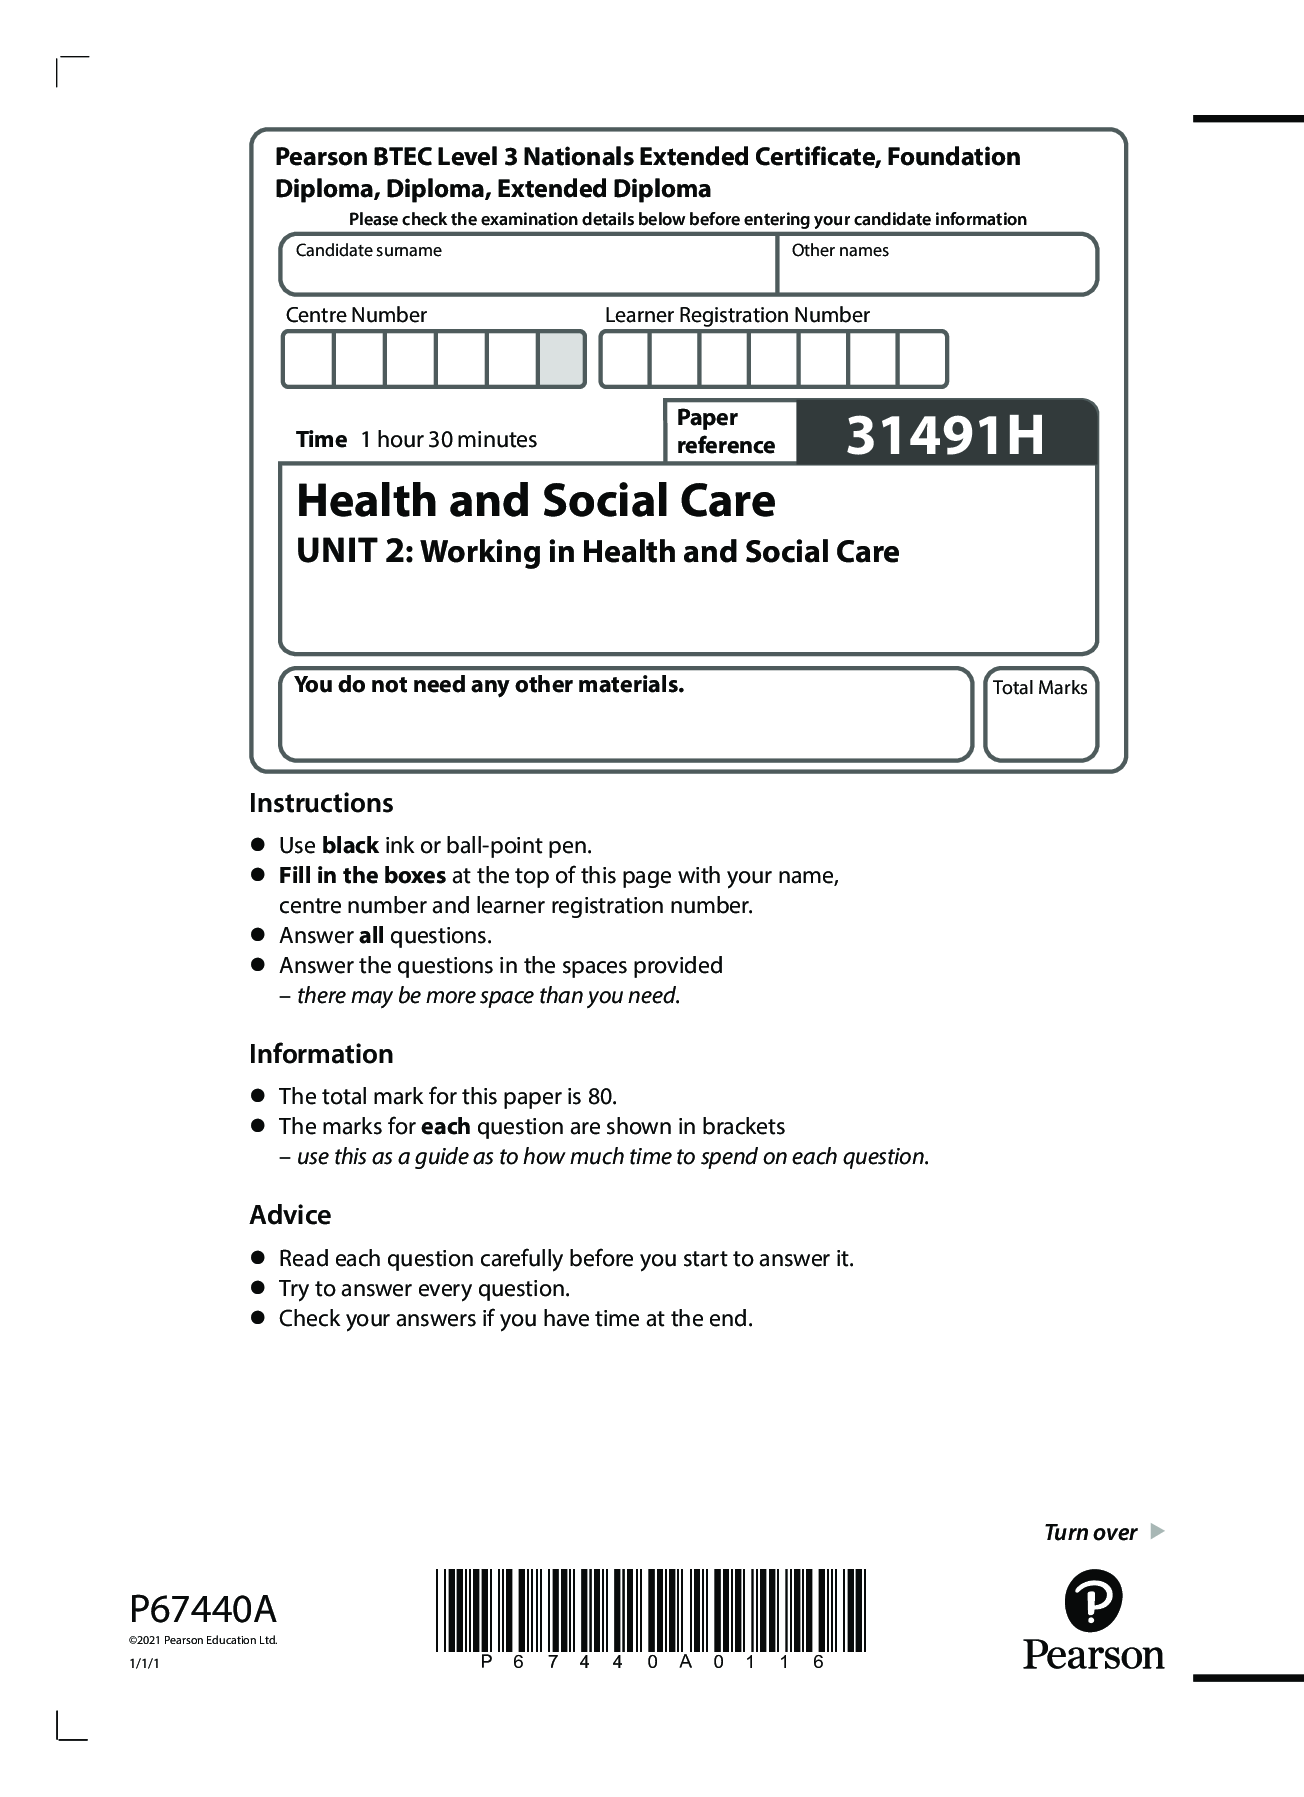 nvq level 3 health and social care personal statement